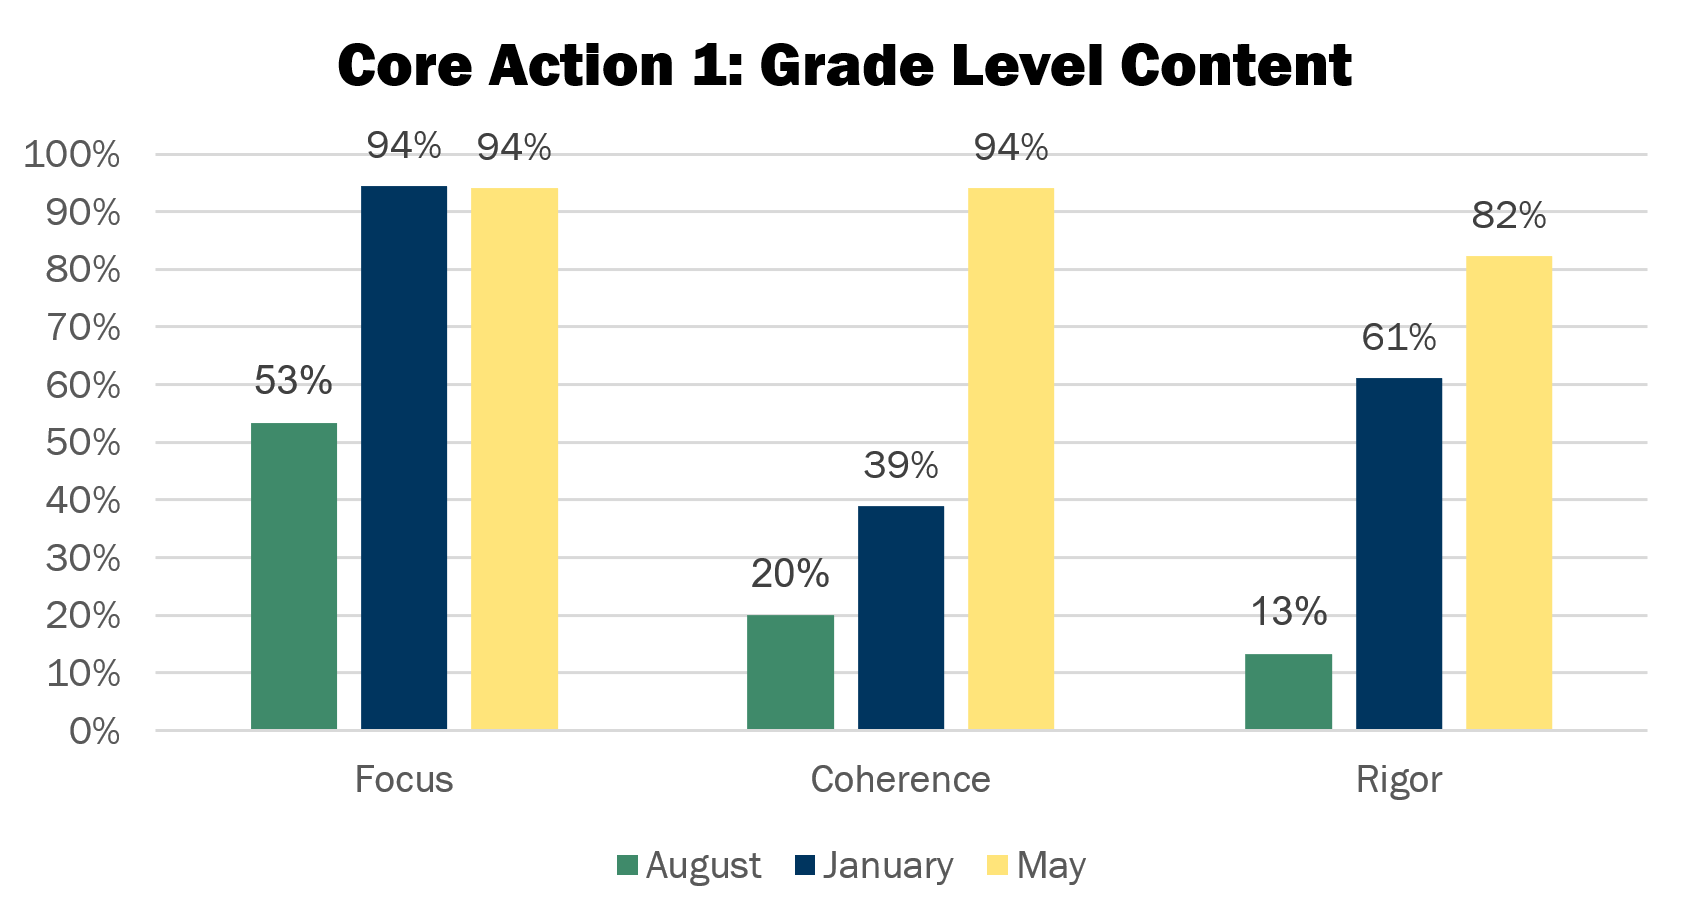 A bar chart comparing Focus, Coherence, and Rigor over August, January, and May. 